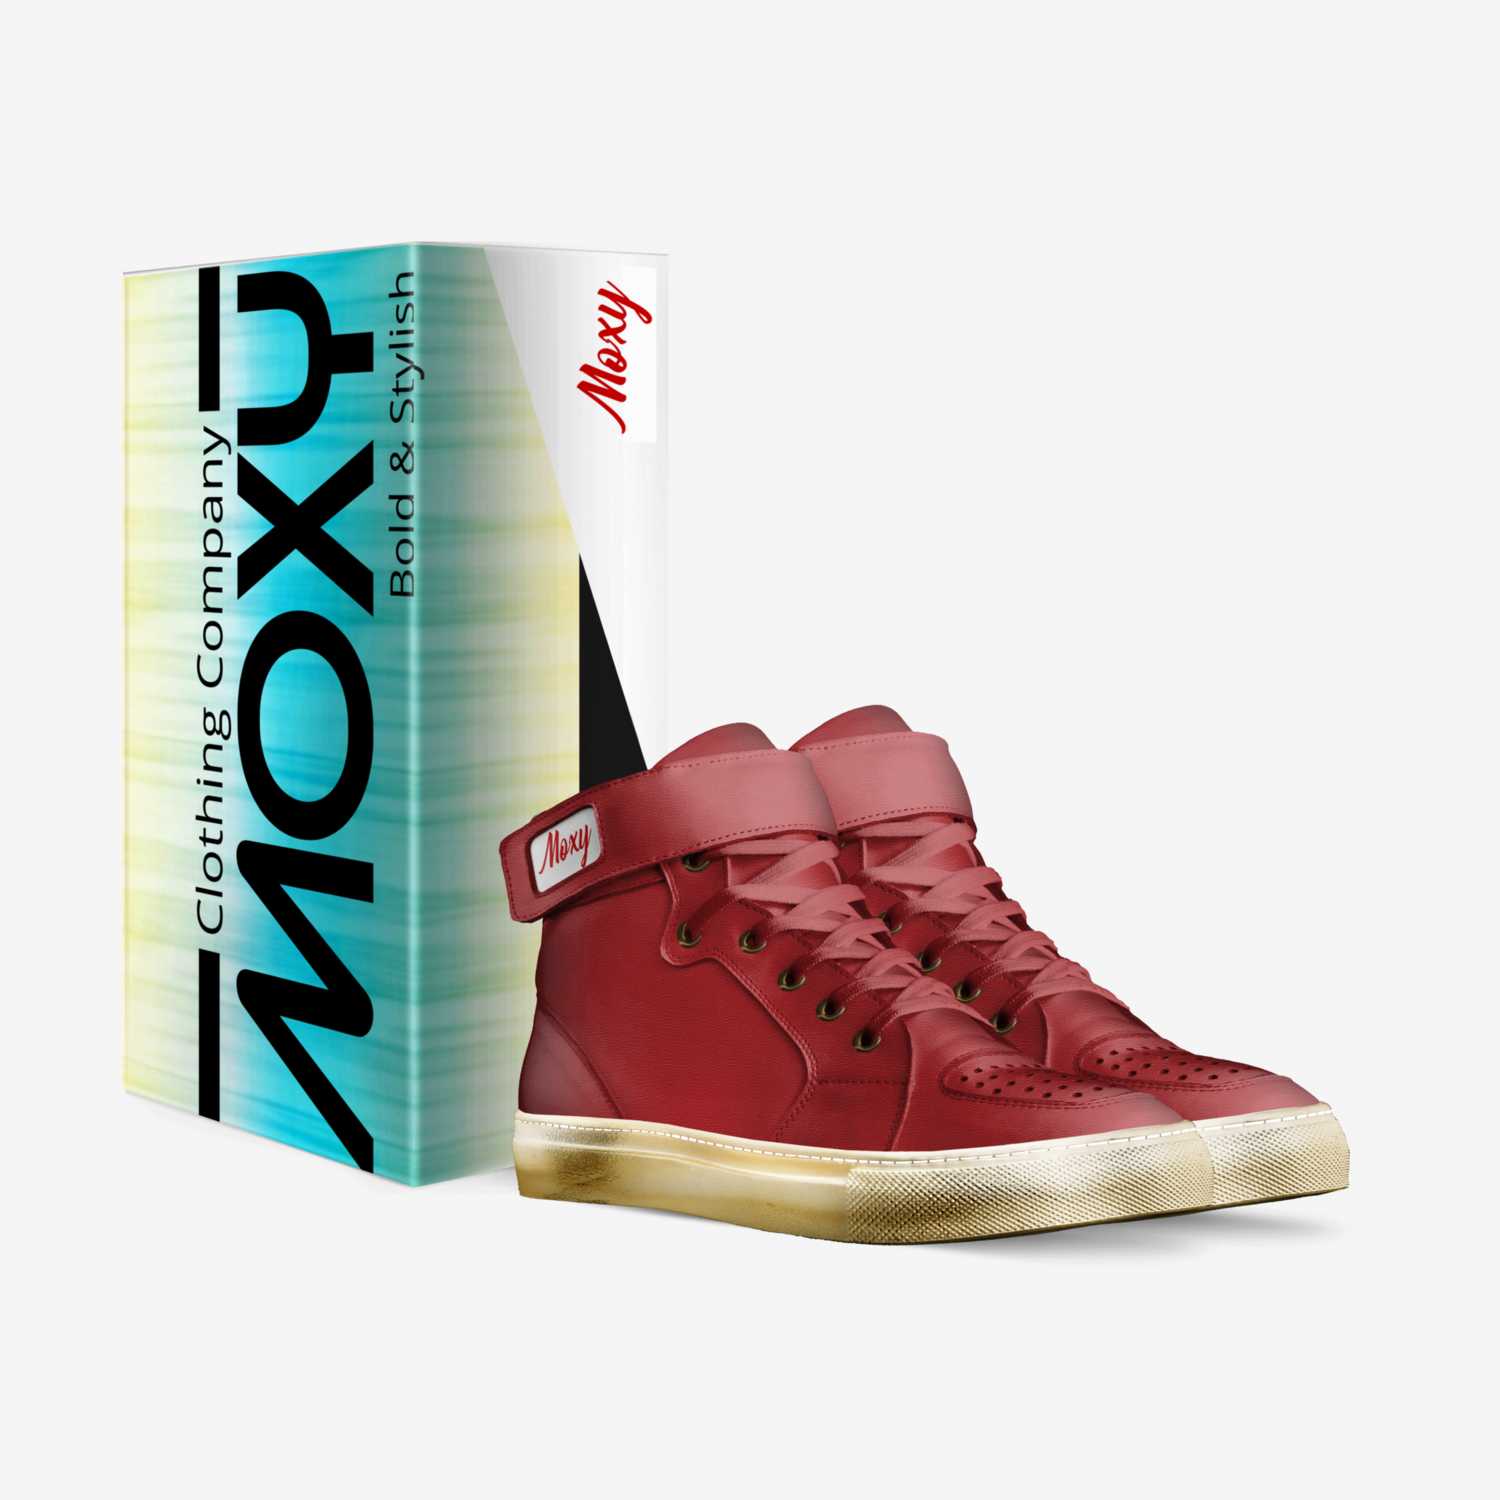 Elites Red custom made in Italy shoes by Moxy Clothing Co. | Box view